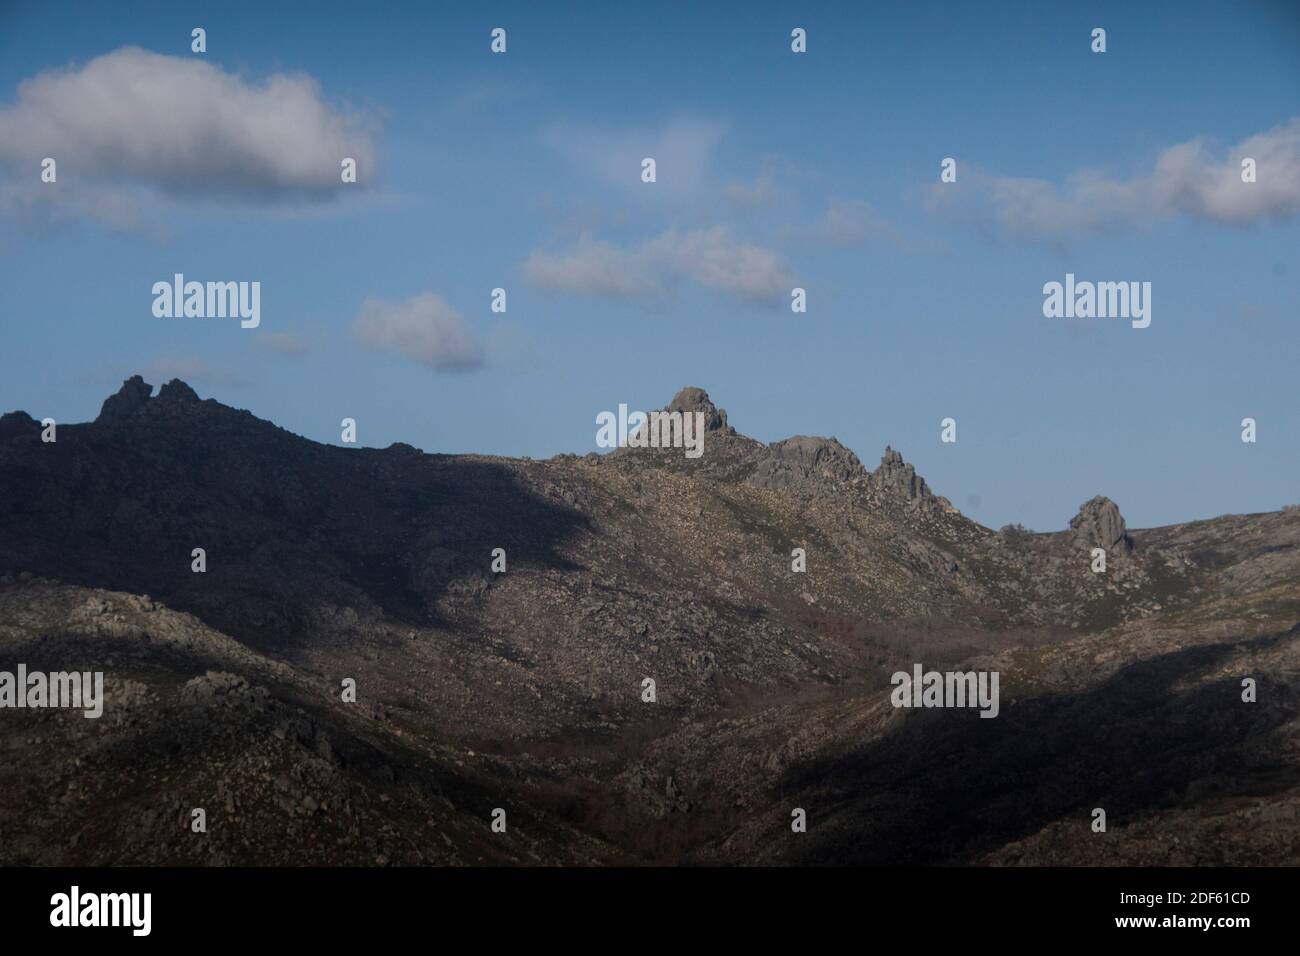 Mountain rocky landscape in a sunny autumn day, as the shadow from the clouds cover the landscape rocky peaks Stock Photo